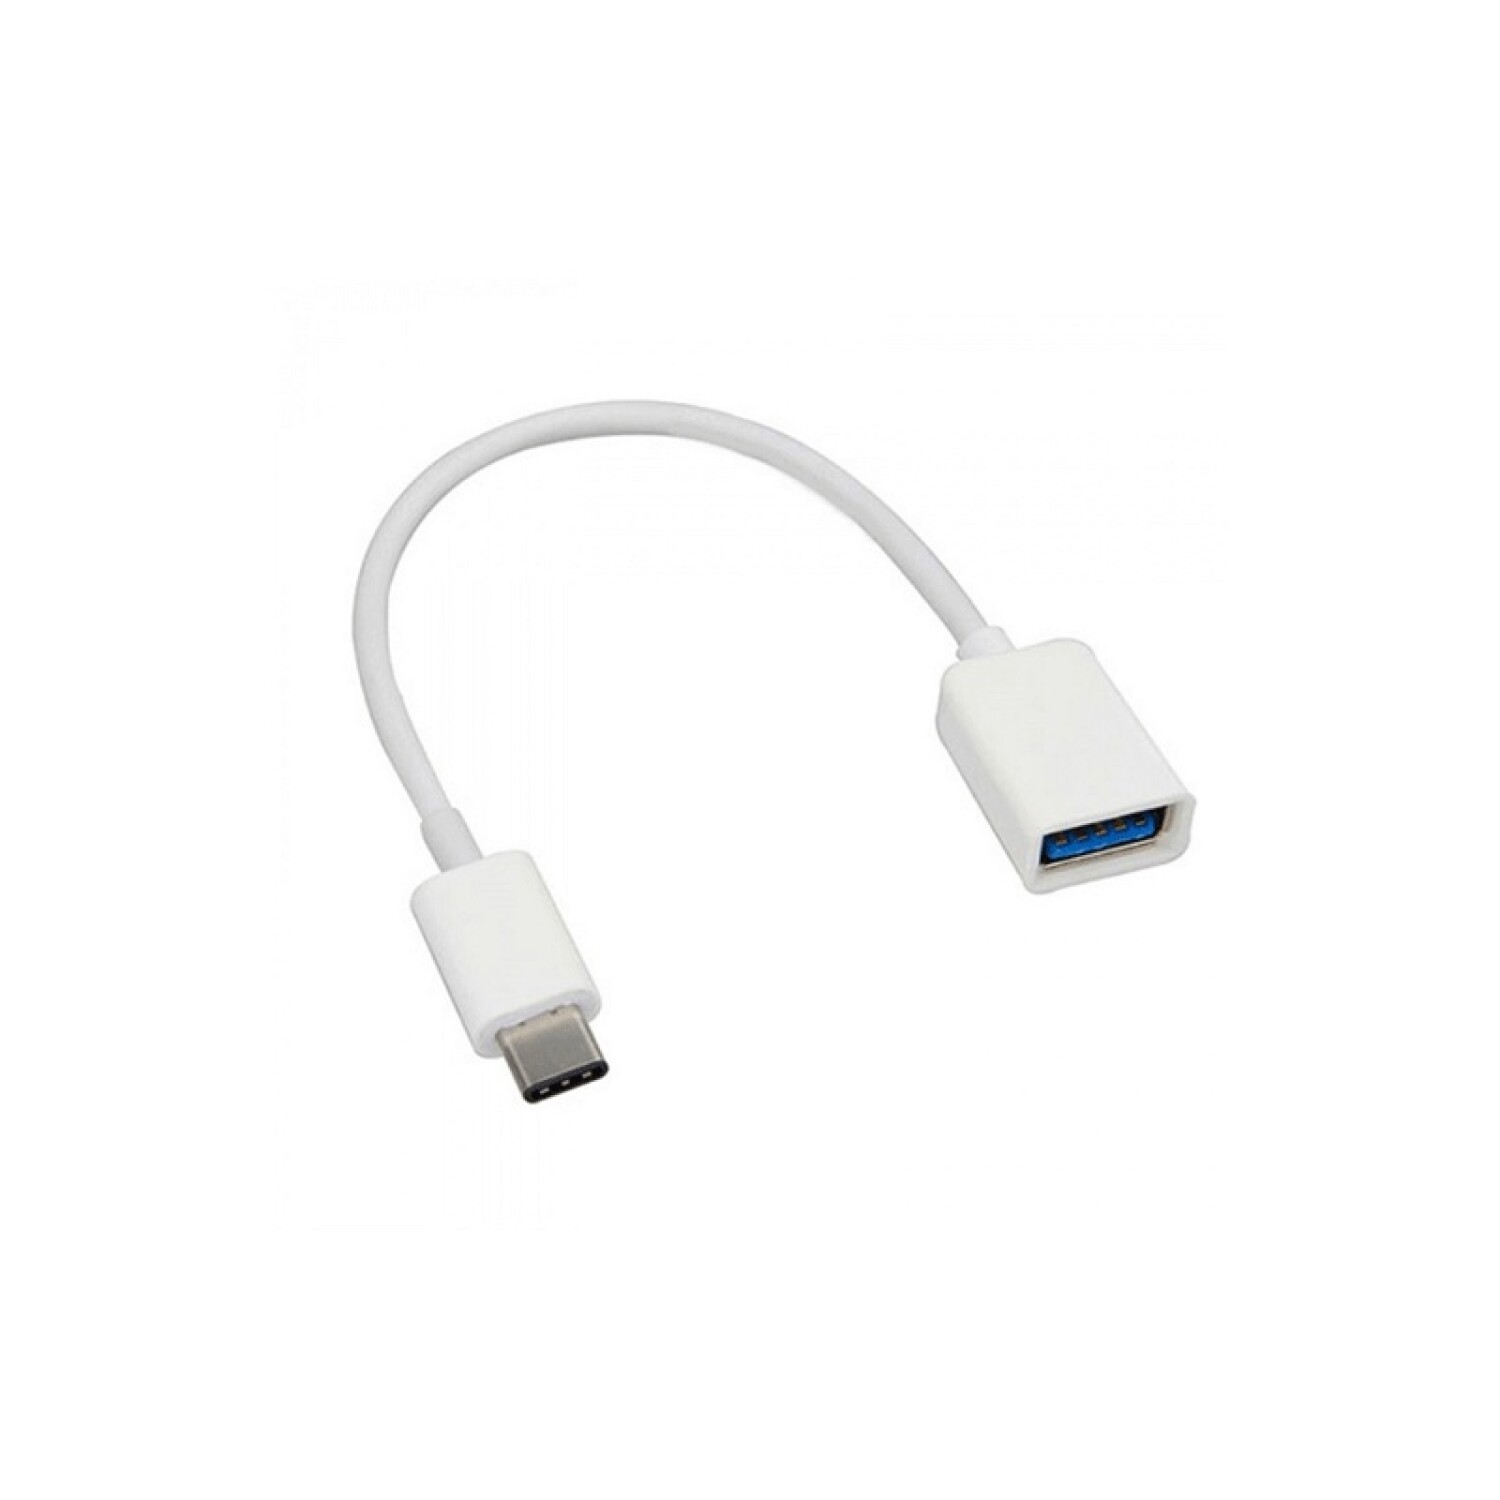 CABLE OTG USB 3.1 TIPO C A USB HEMBRA 3.0